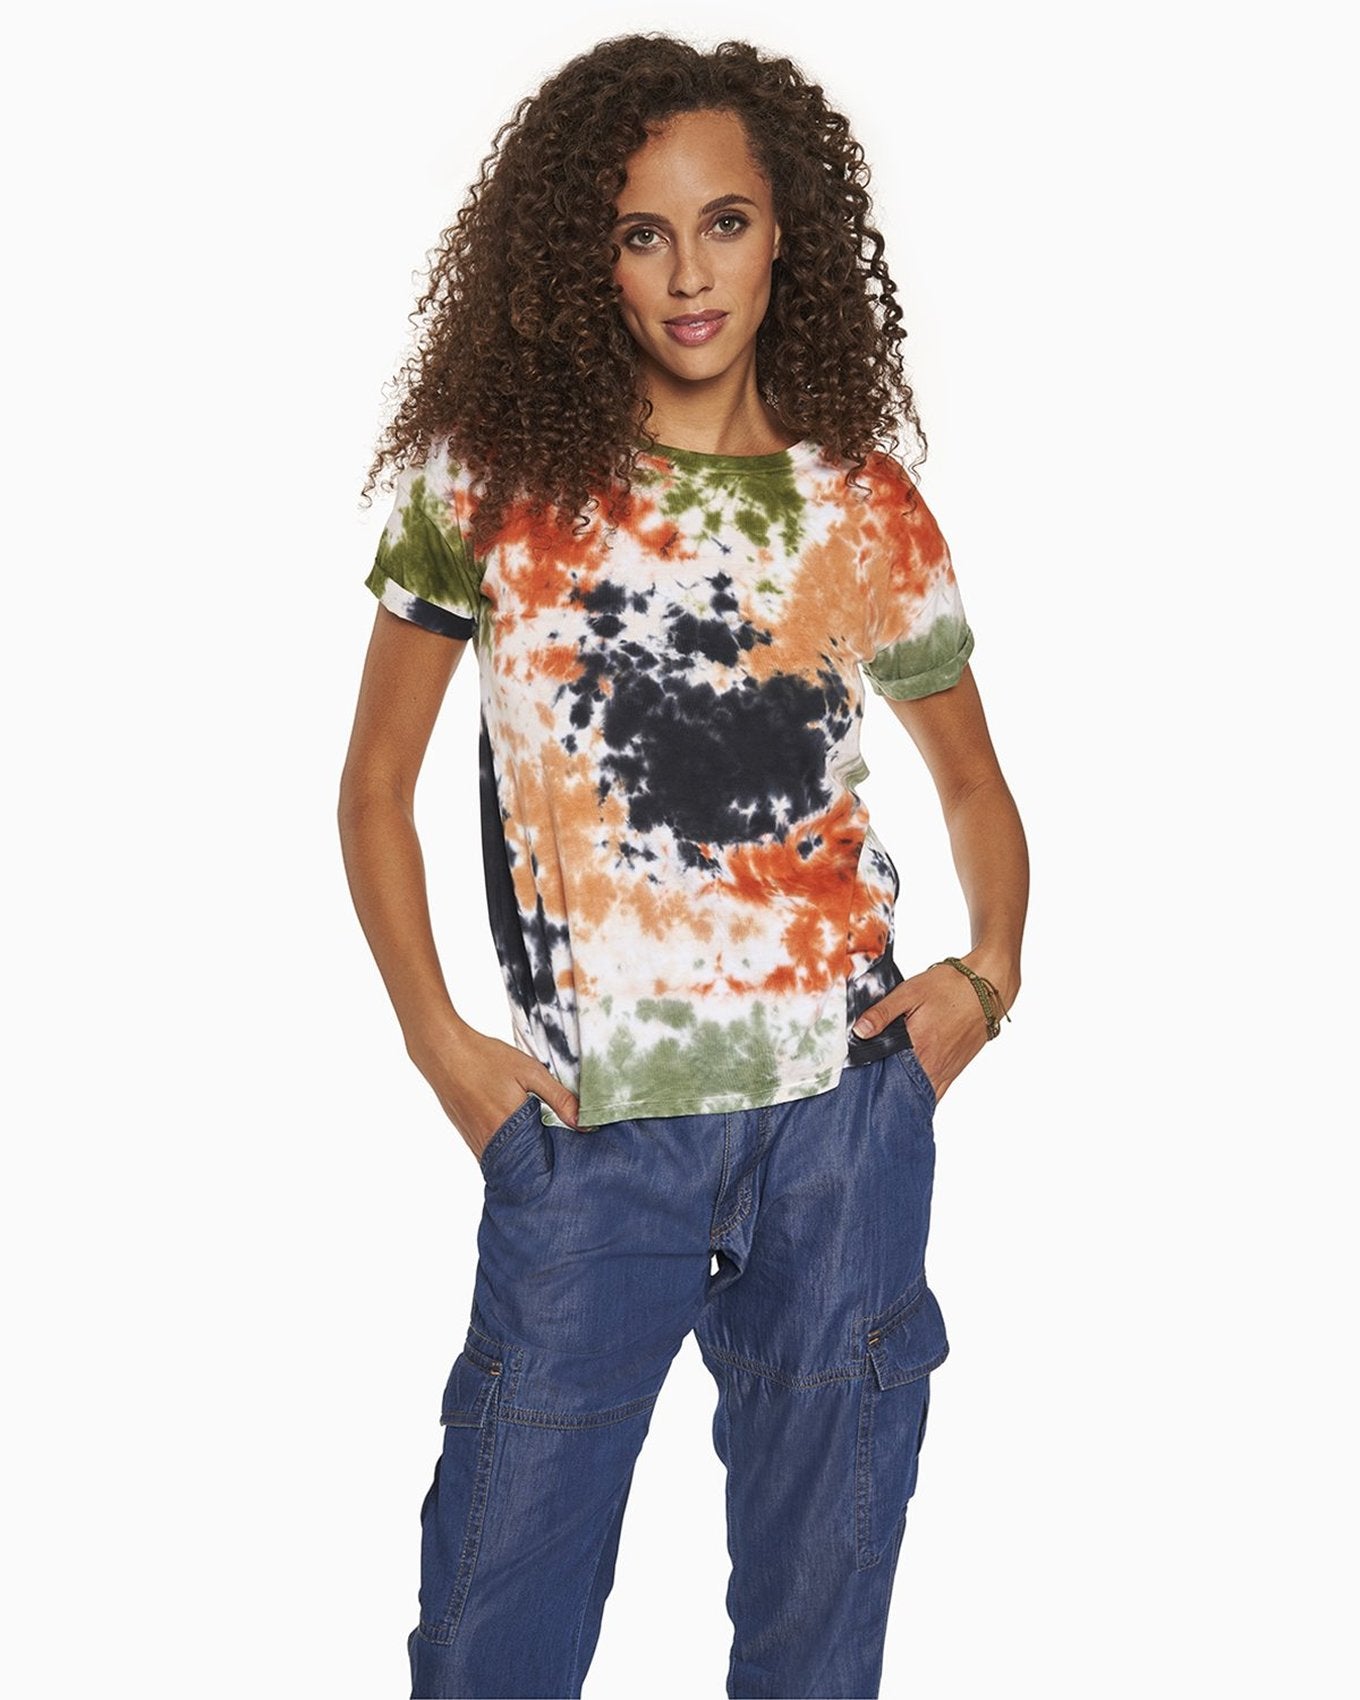 YesAnd Organic Tie Dye Rolled Short Sleeve T-Shirt T-Shirt in color Earth Tie Dye and shape t-shirt